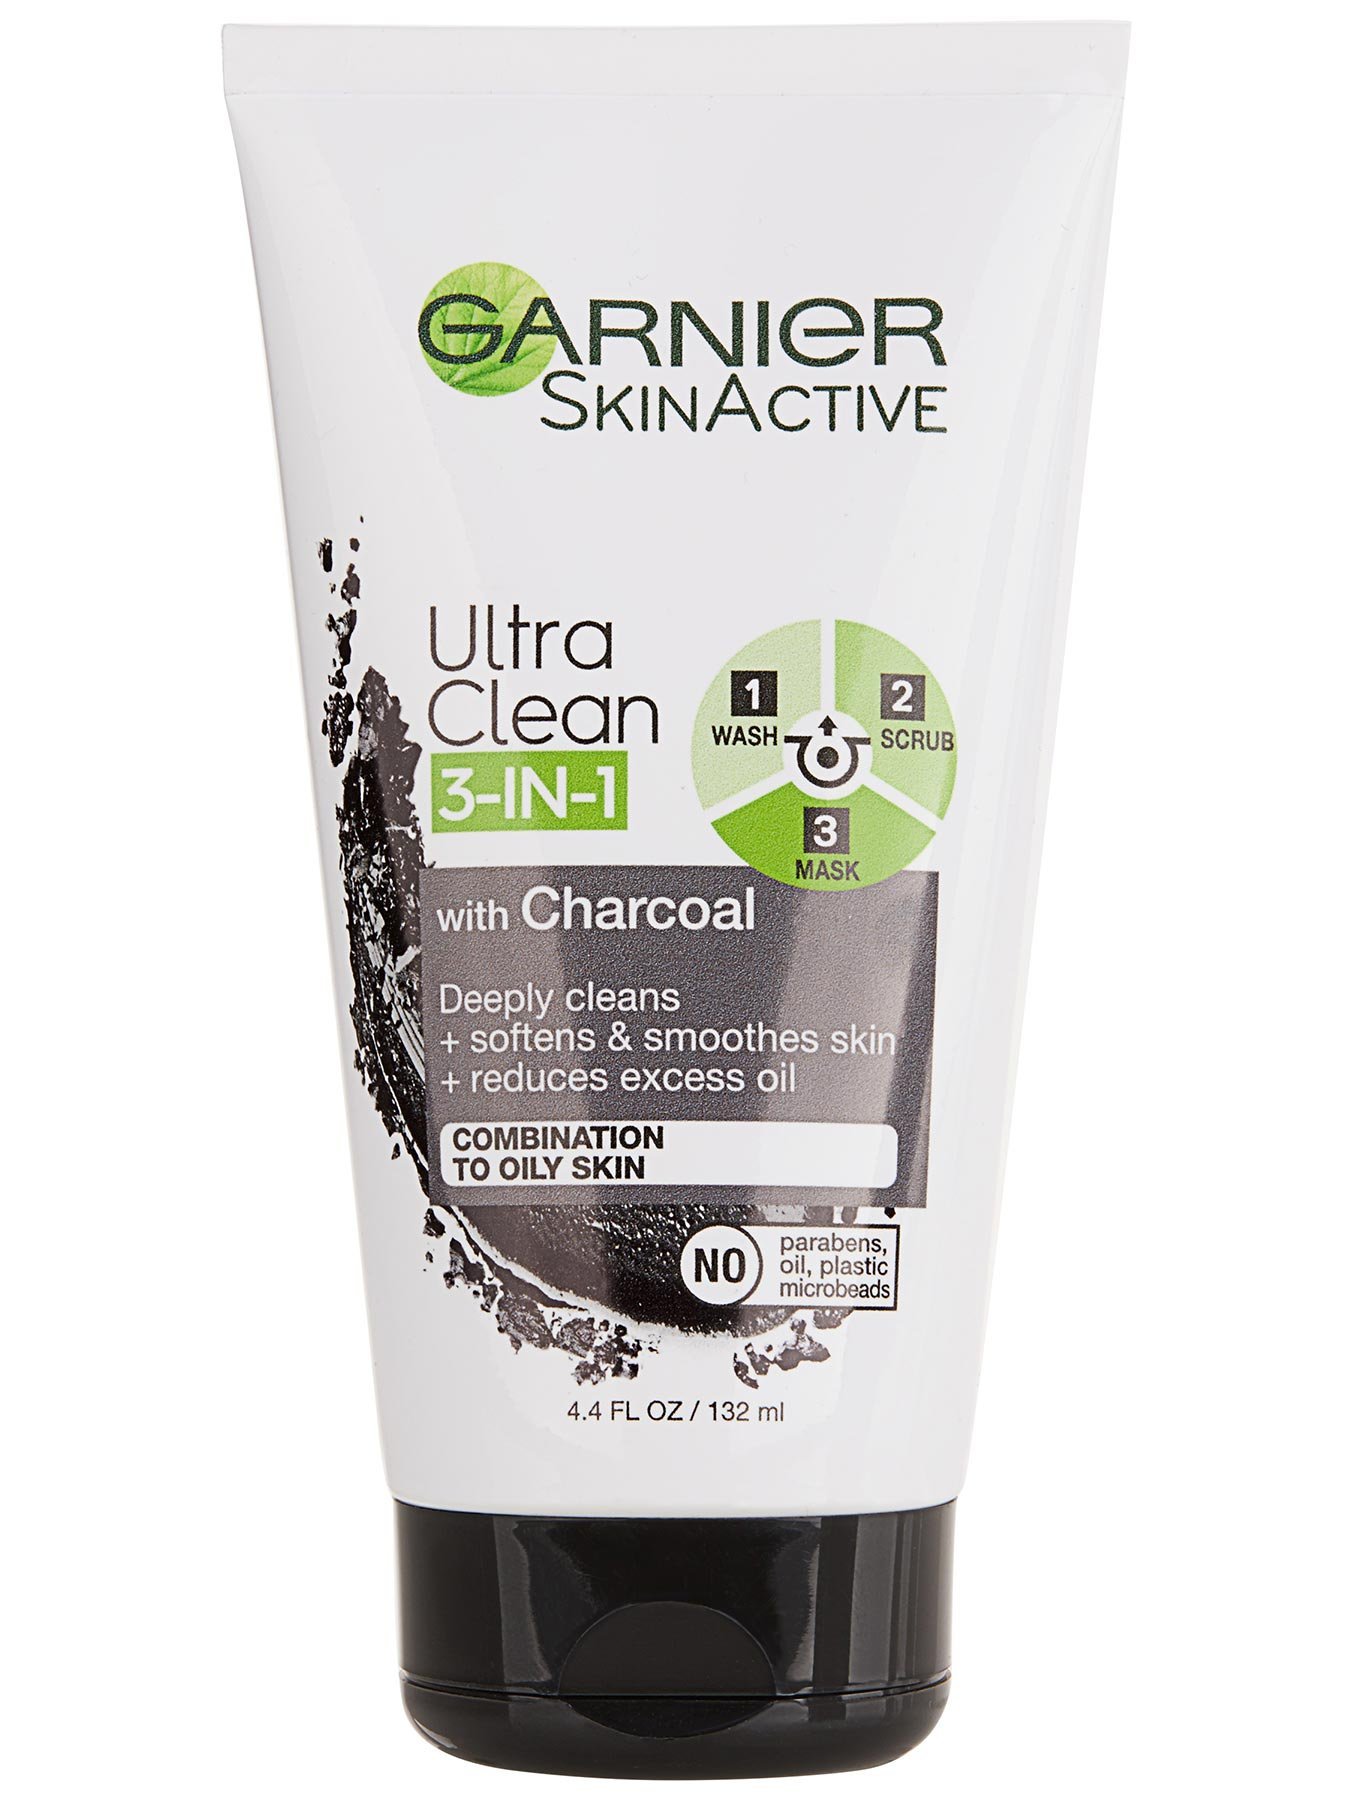 Wings os selv grus SkinActive 3-in-1 Charcoal Face Mask & Cleanser - Garnier